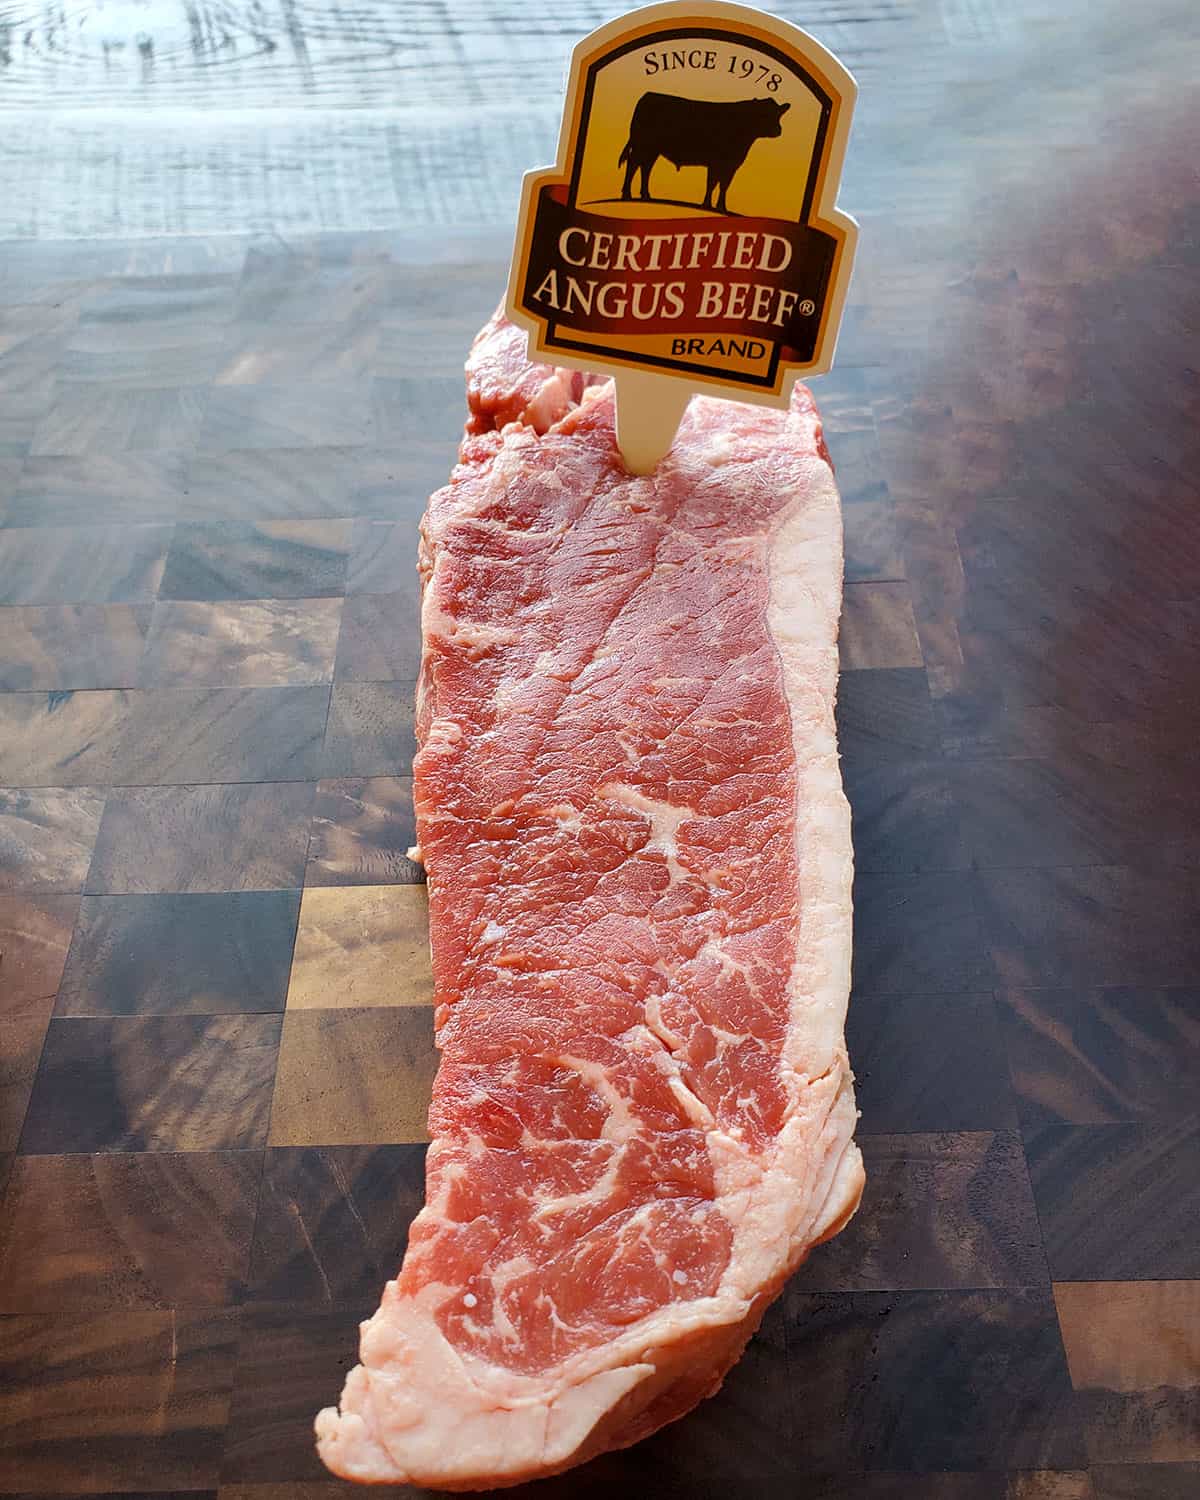 Certified Angus Beef brand ribeye choice grade with moderate marbling.